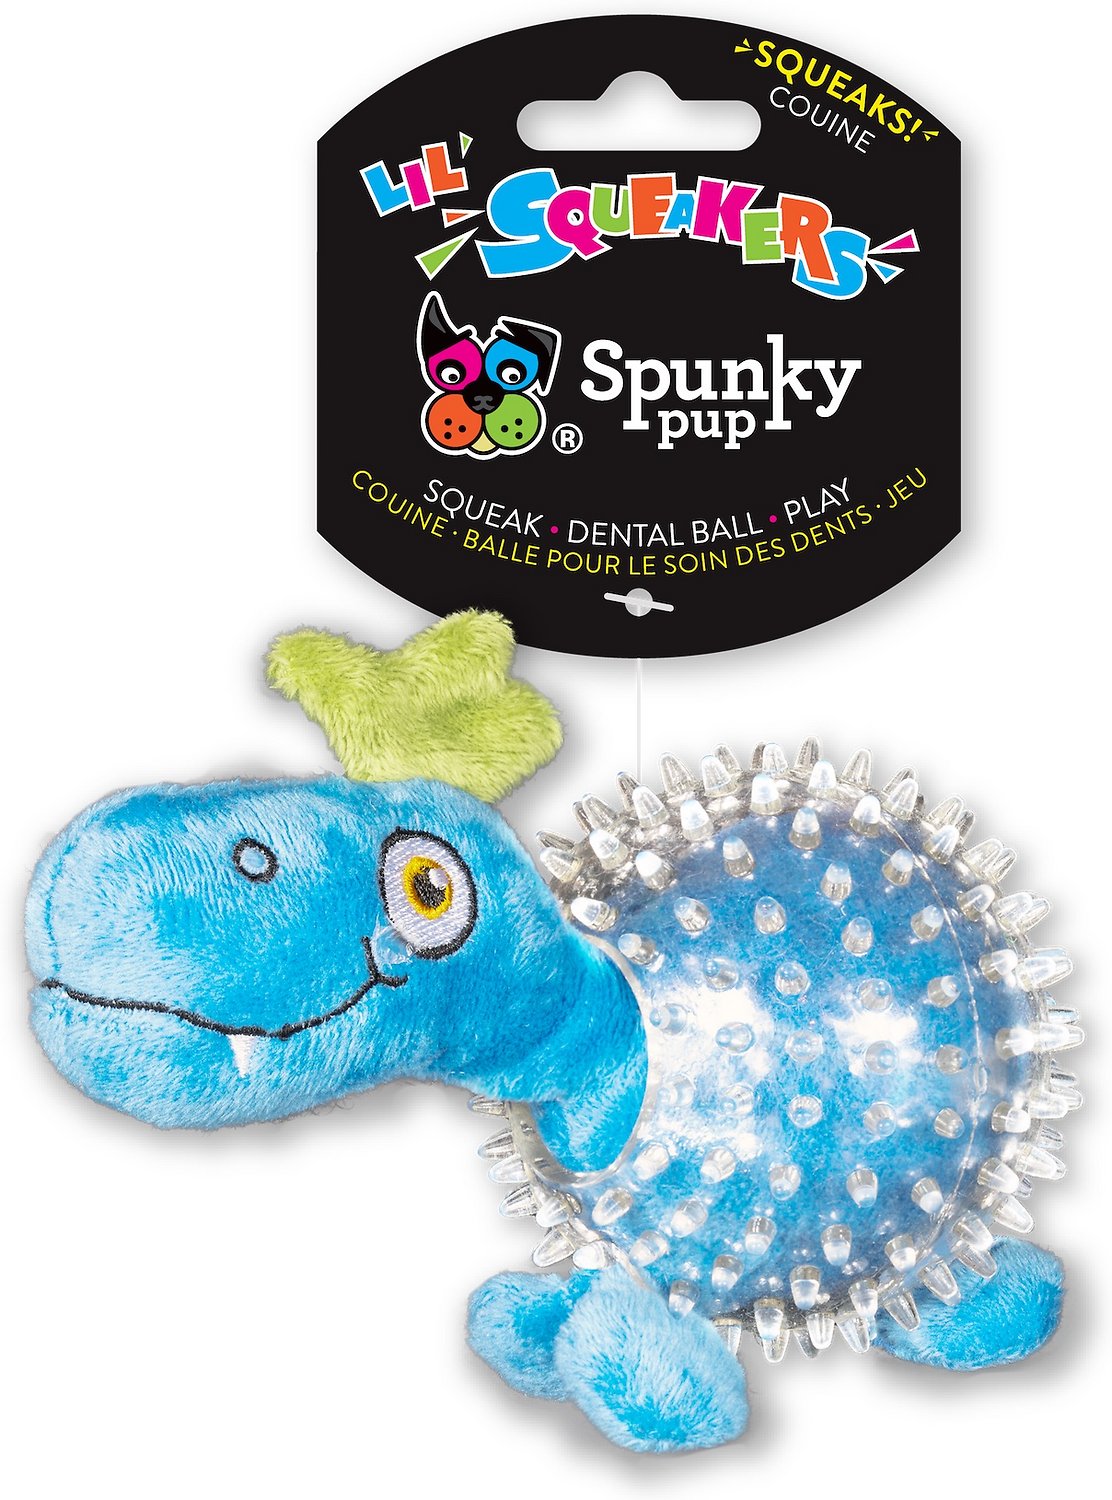 Canine's World Stuffed Toys Dino In Cear Spiky Ball Dog Toy, Color Varies Spunky Pup